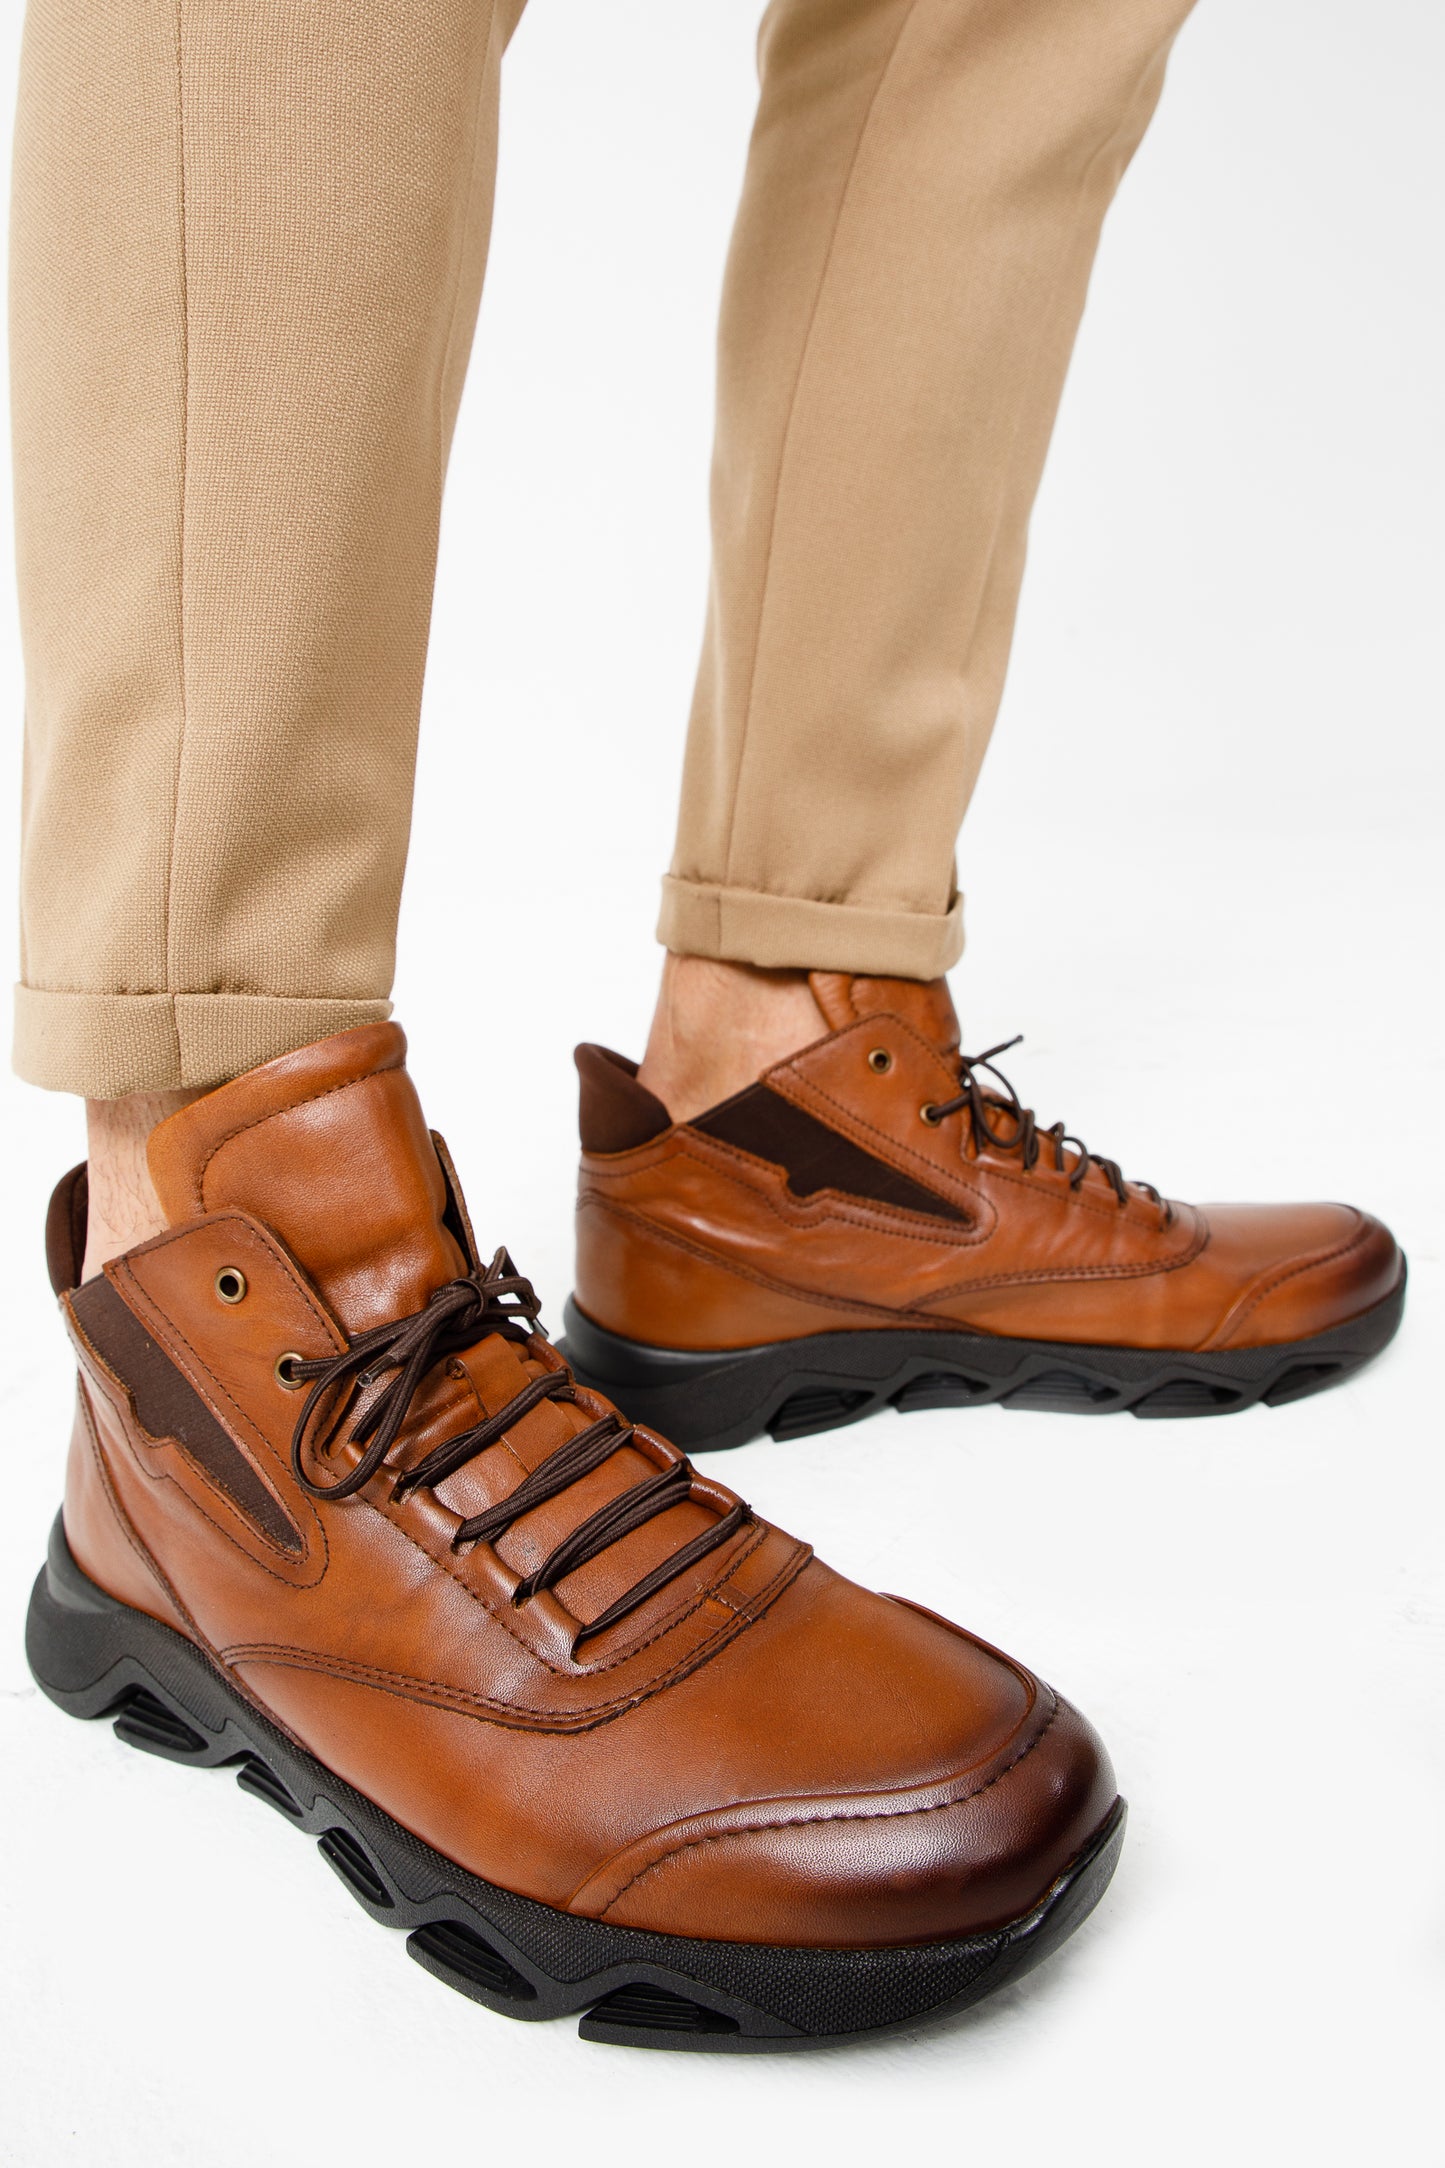 The Montana Tan Leather Casual Men Boot